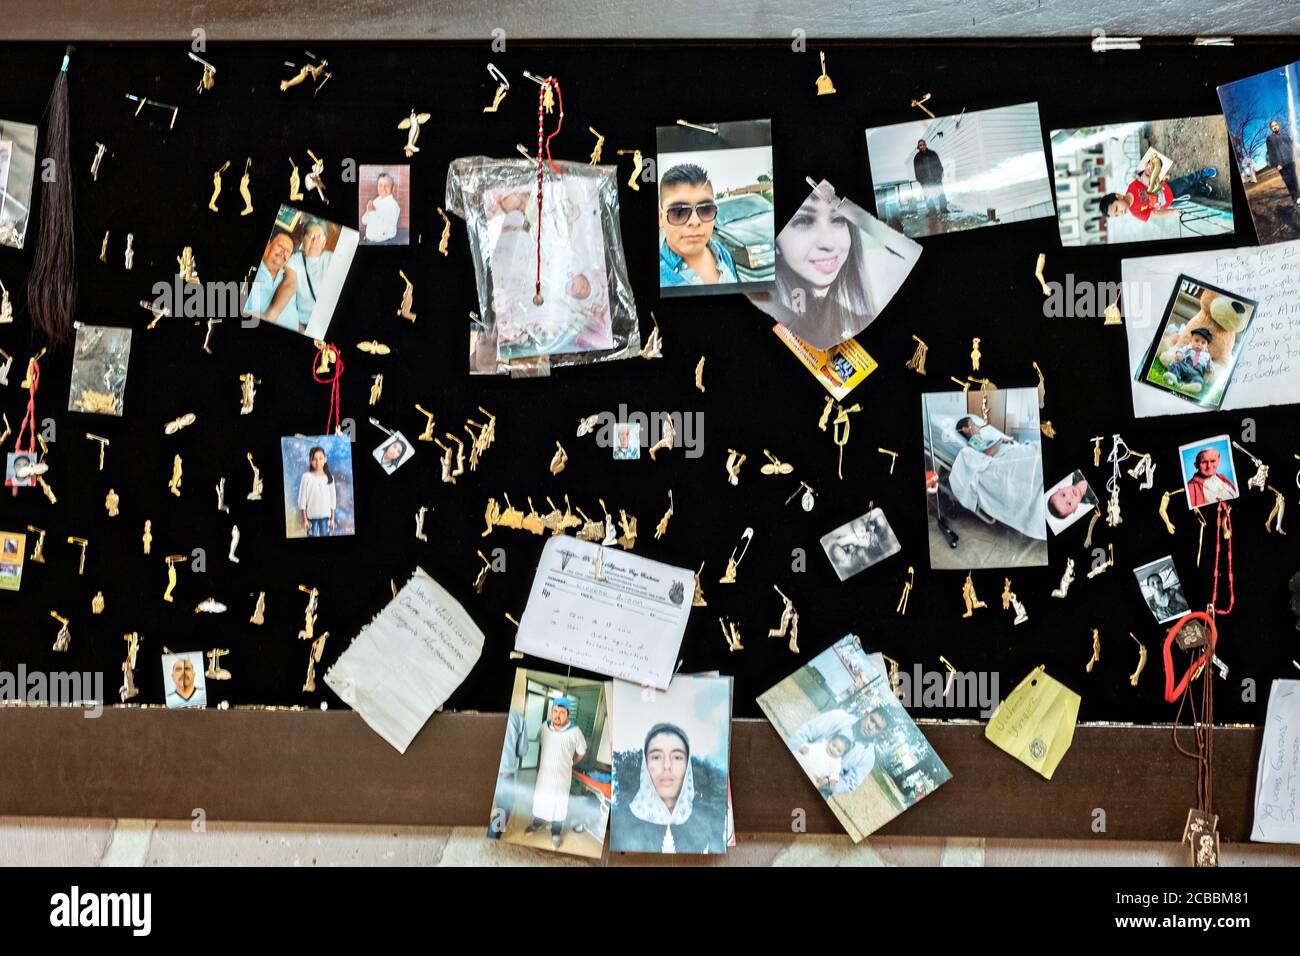 Mementos from believers left at the Sanctuary of Santa Ana de Guadalupe, Jalisco State, Mexico. The sanctuary honors Saint Toribio who was a Mexican Catholic priest and martyr killed during the anti-clerical persecutions of the Cristero War and is followed as the patron saint of migrants. Stock Photo